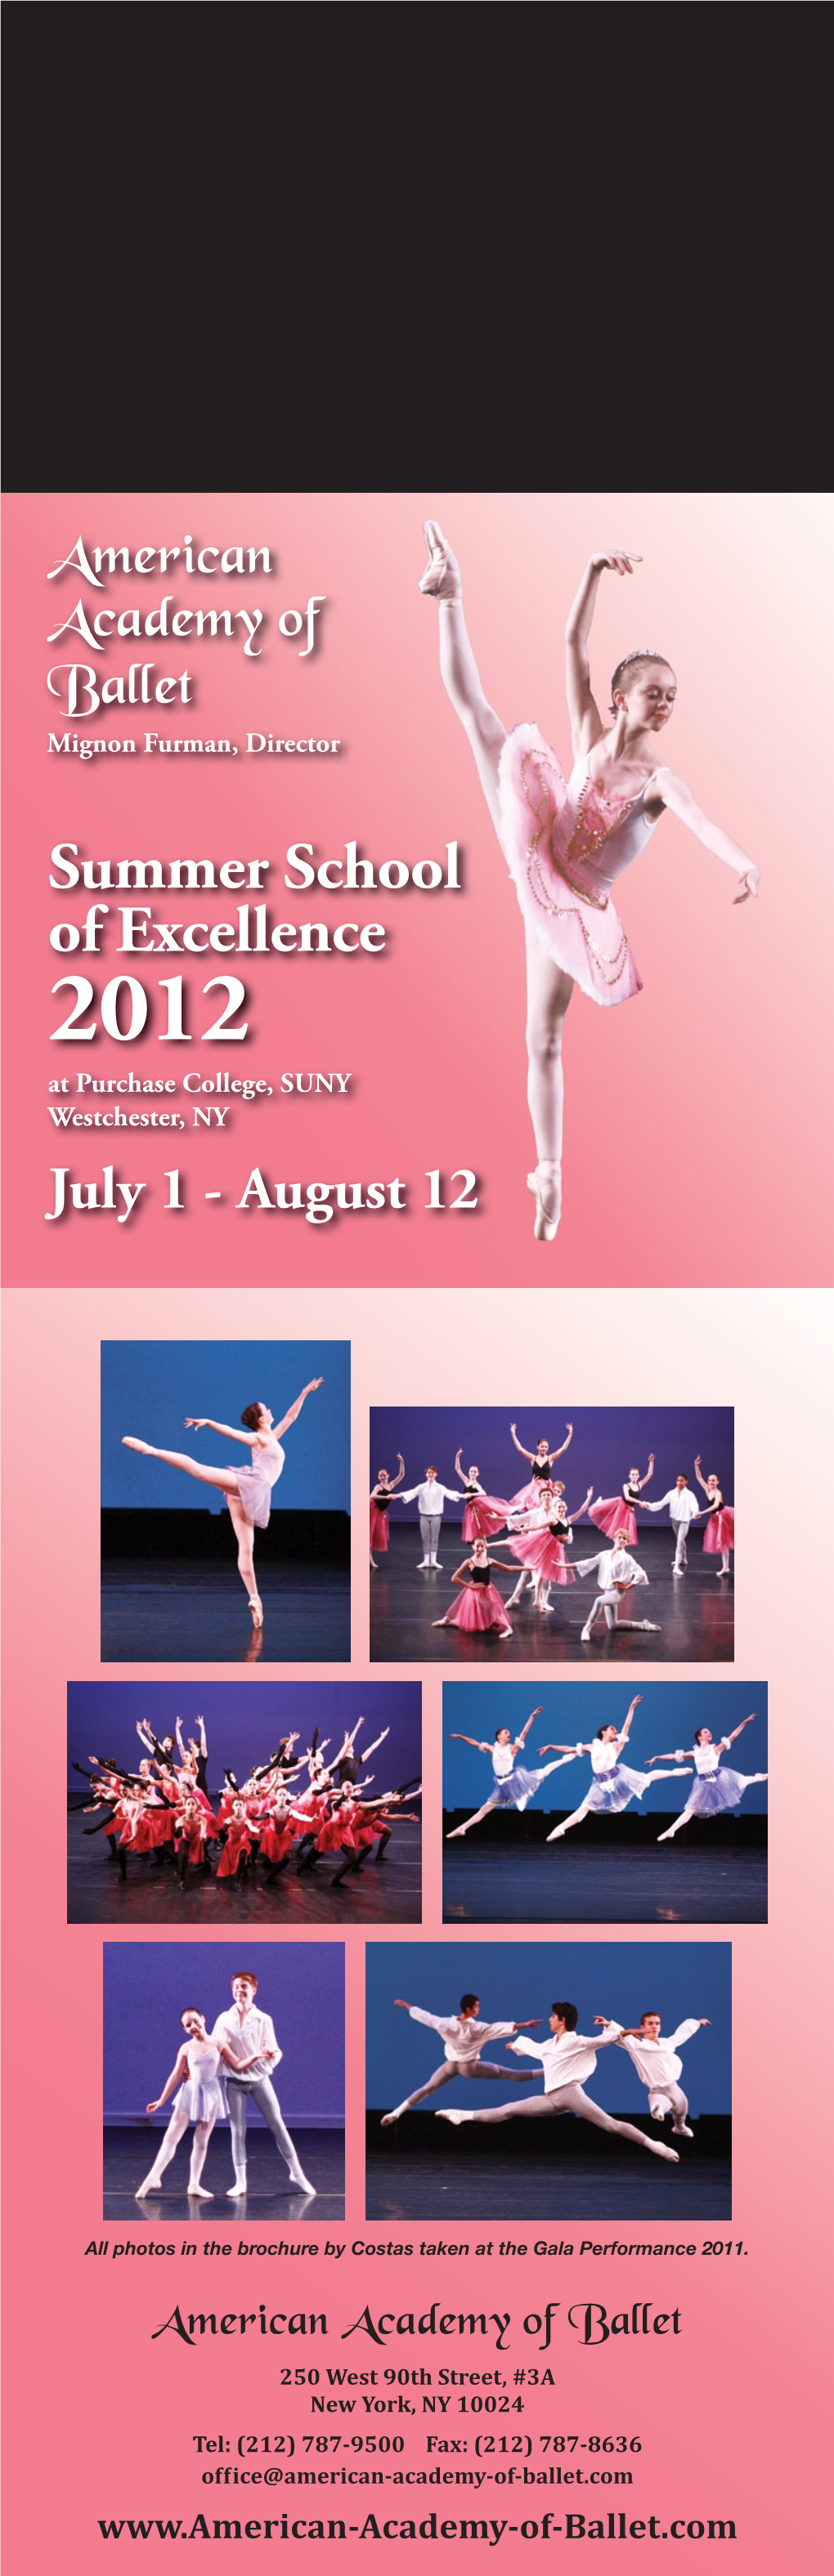 Summer School of Excellence 2012 at Purchase College, SUNY Westchester, NY July 1 - August 12